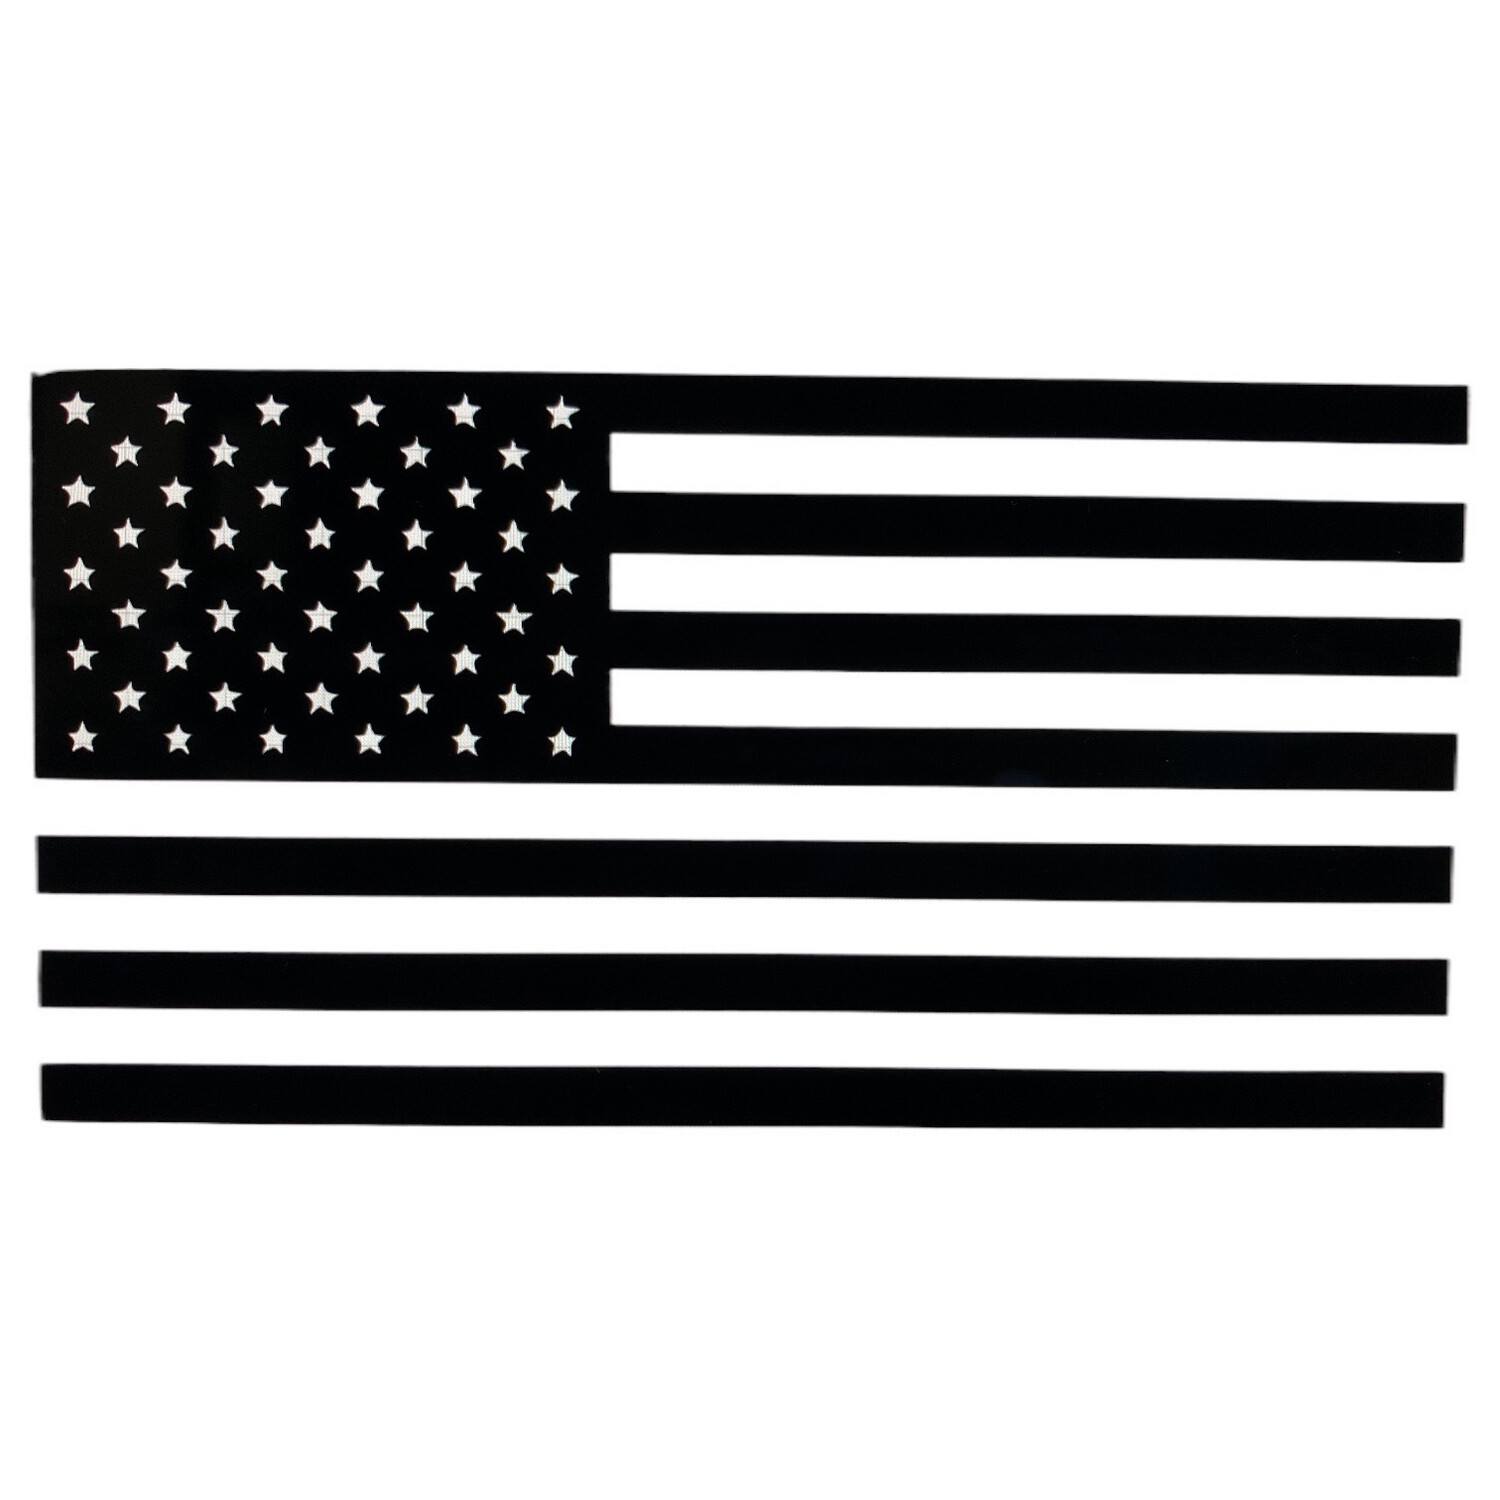 Traditional flag 11.5 x 6 decal